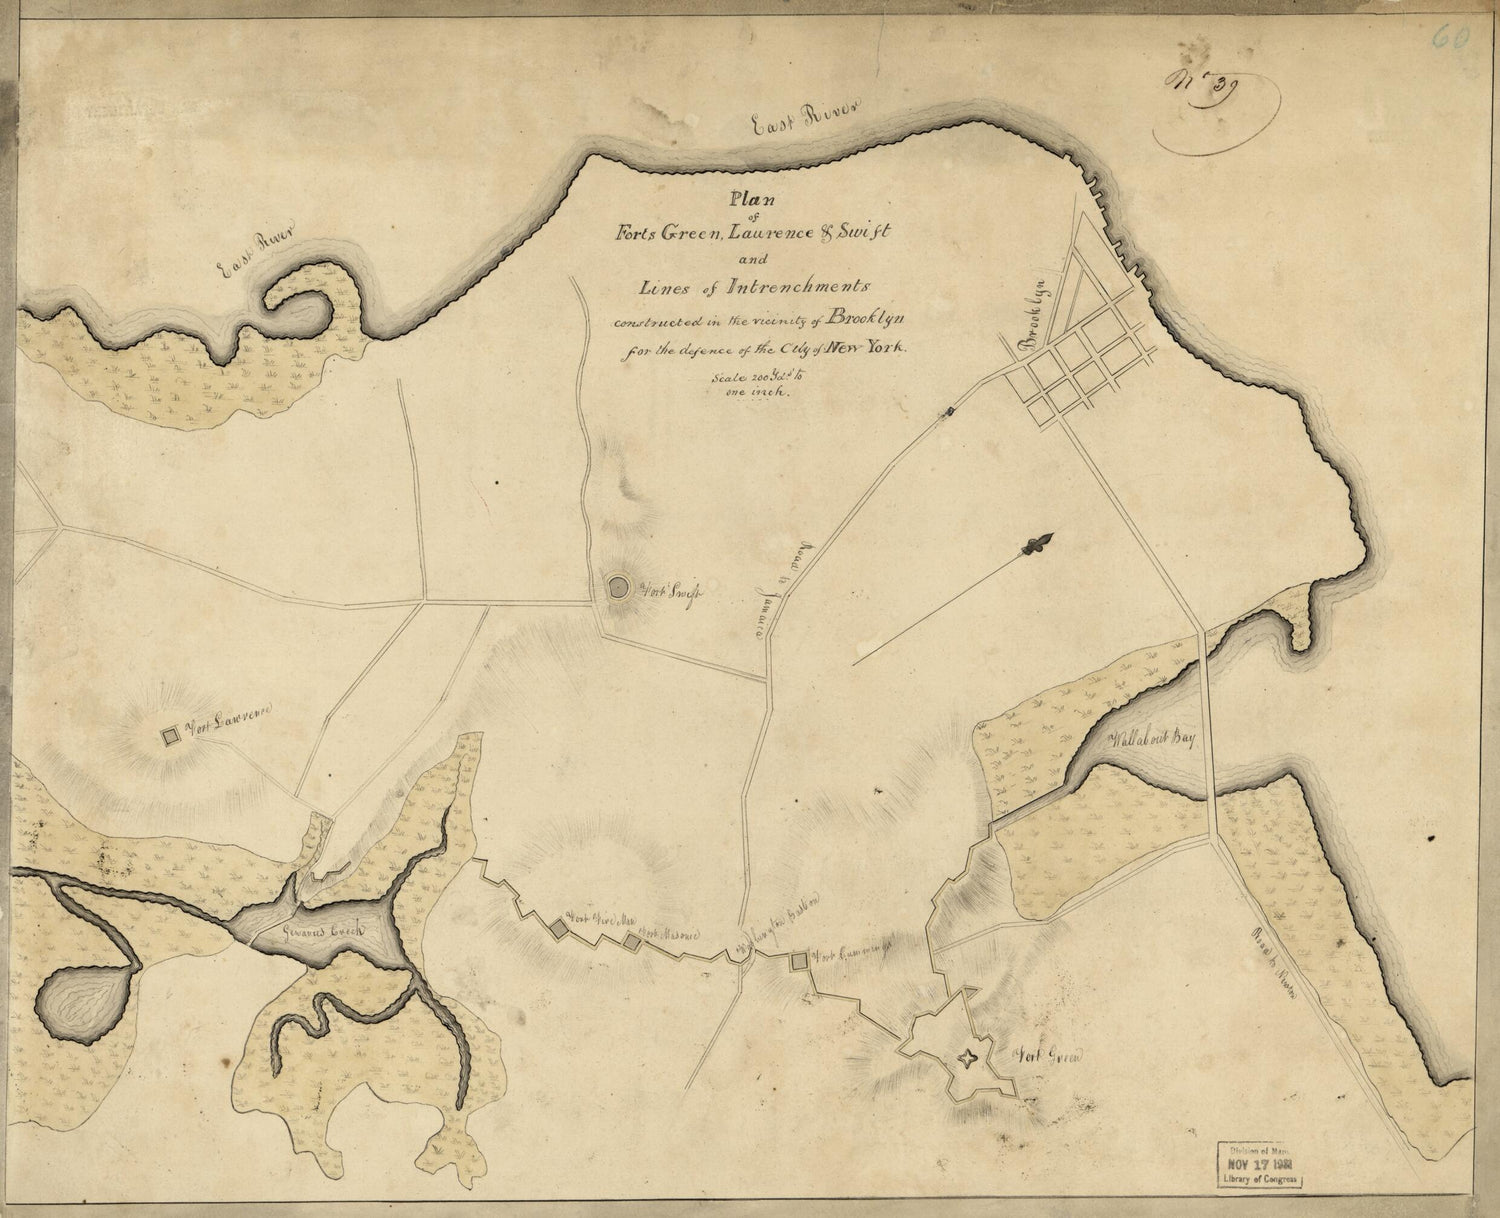 This old map of Plan of Forts Green, Laurence &amp; Swift and Lines of Intrenchments Constructed In the Vicinity of Brooklyn for the Defence of the City of New York from 1814 was created by  United States. War Department. Office of the Chief of Engineers in 